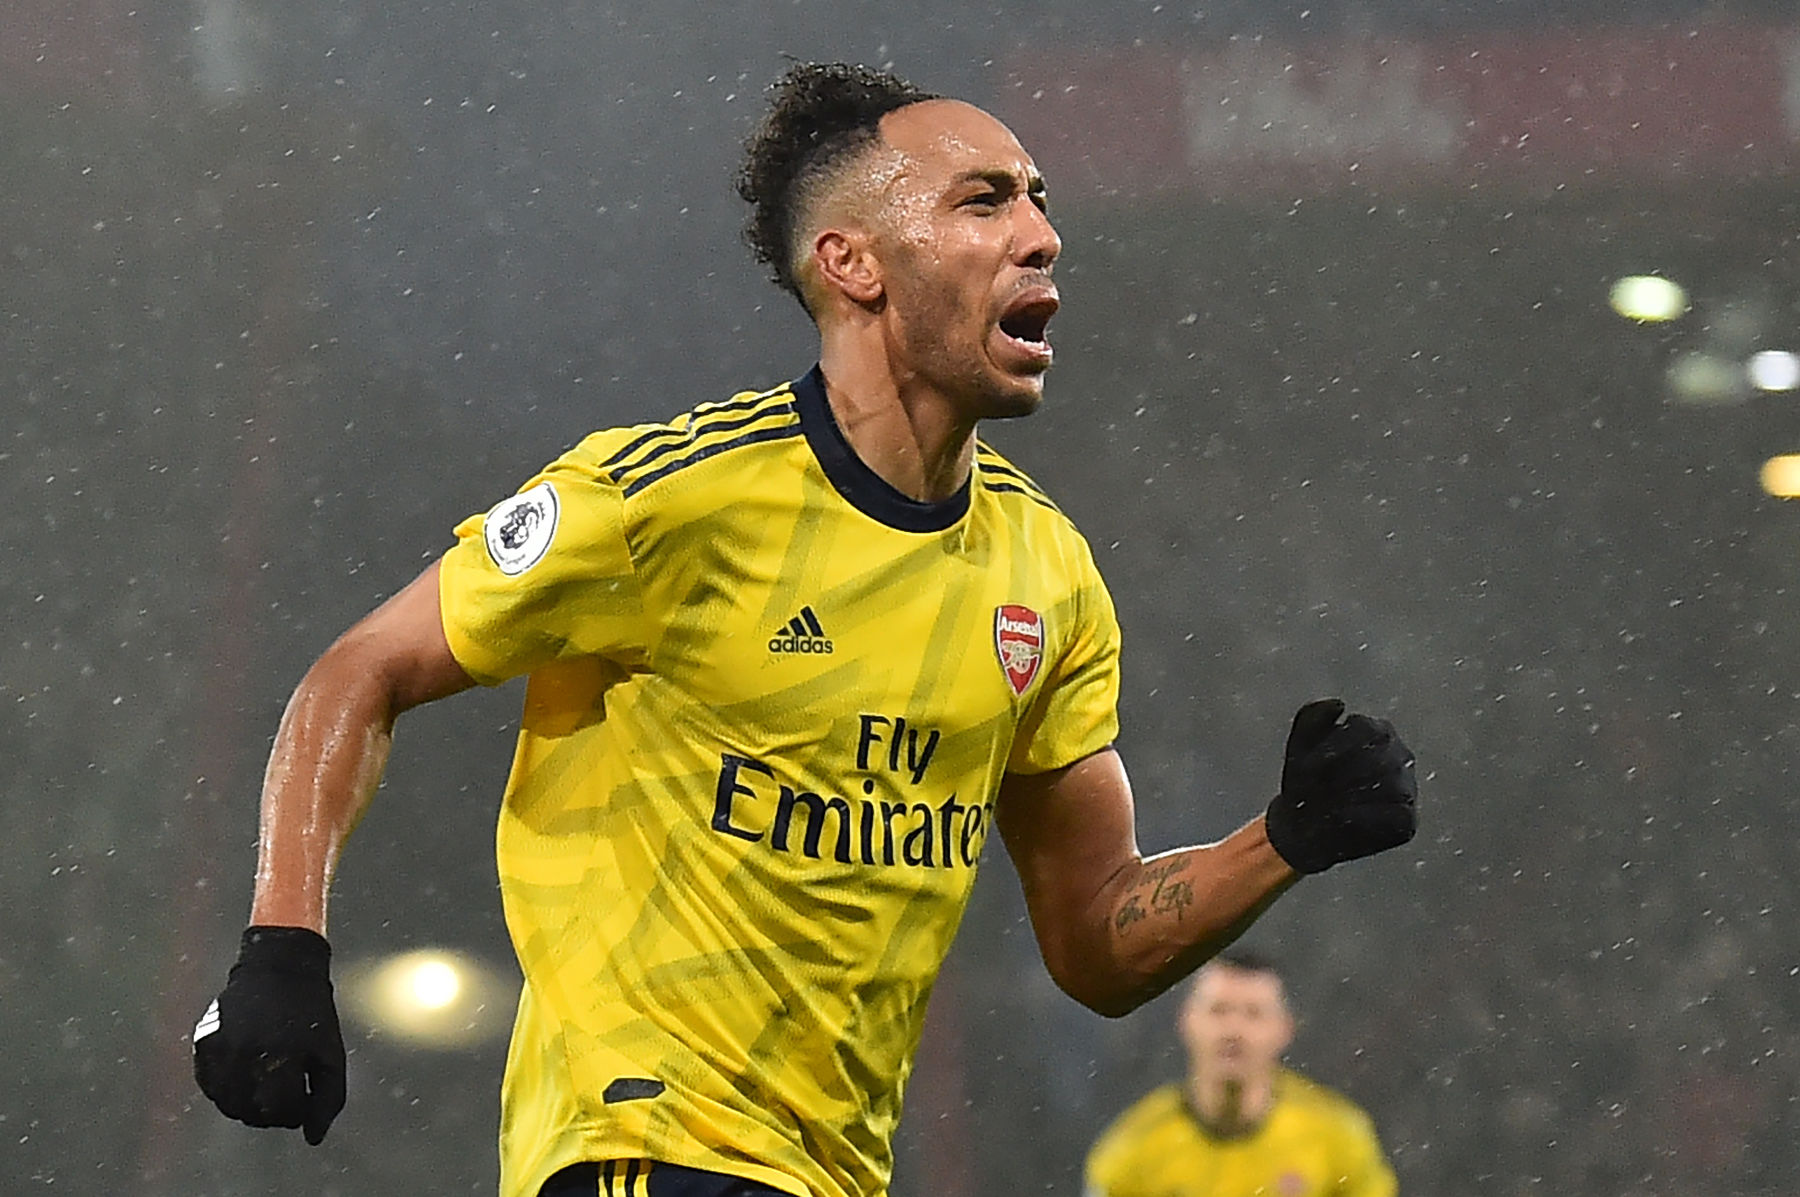 It is up to us to convince Aubameyang to stay - Arteta